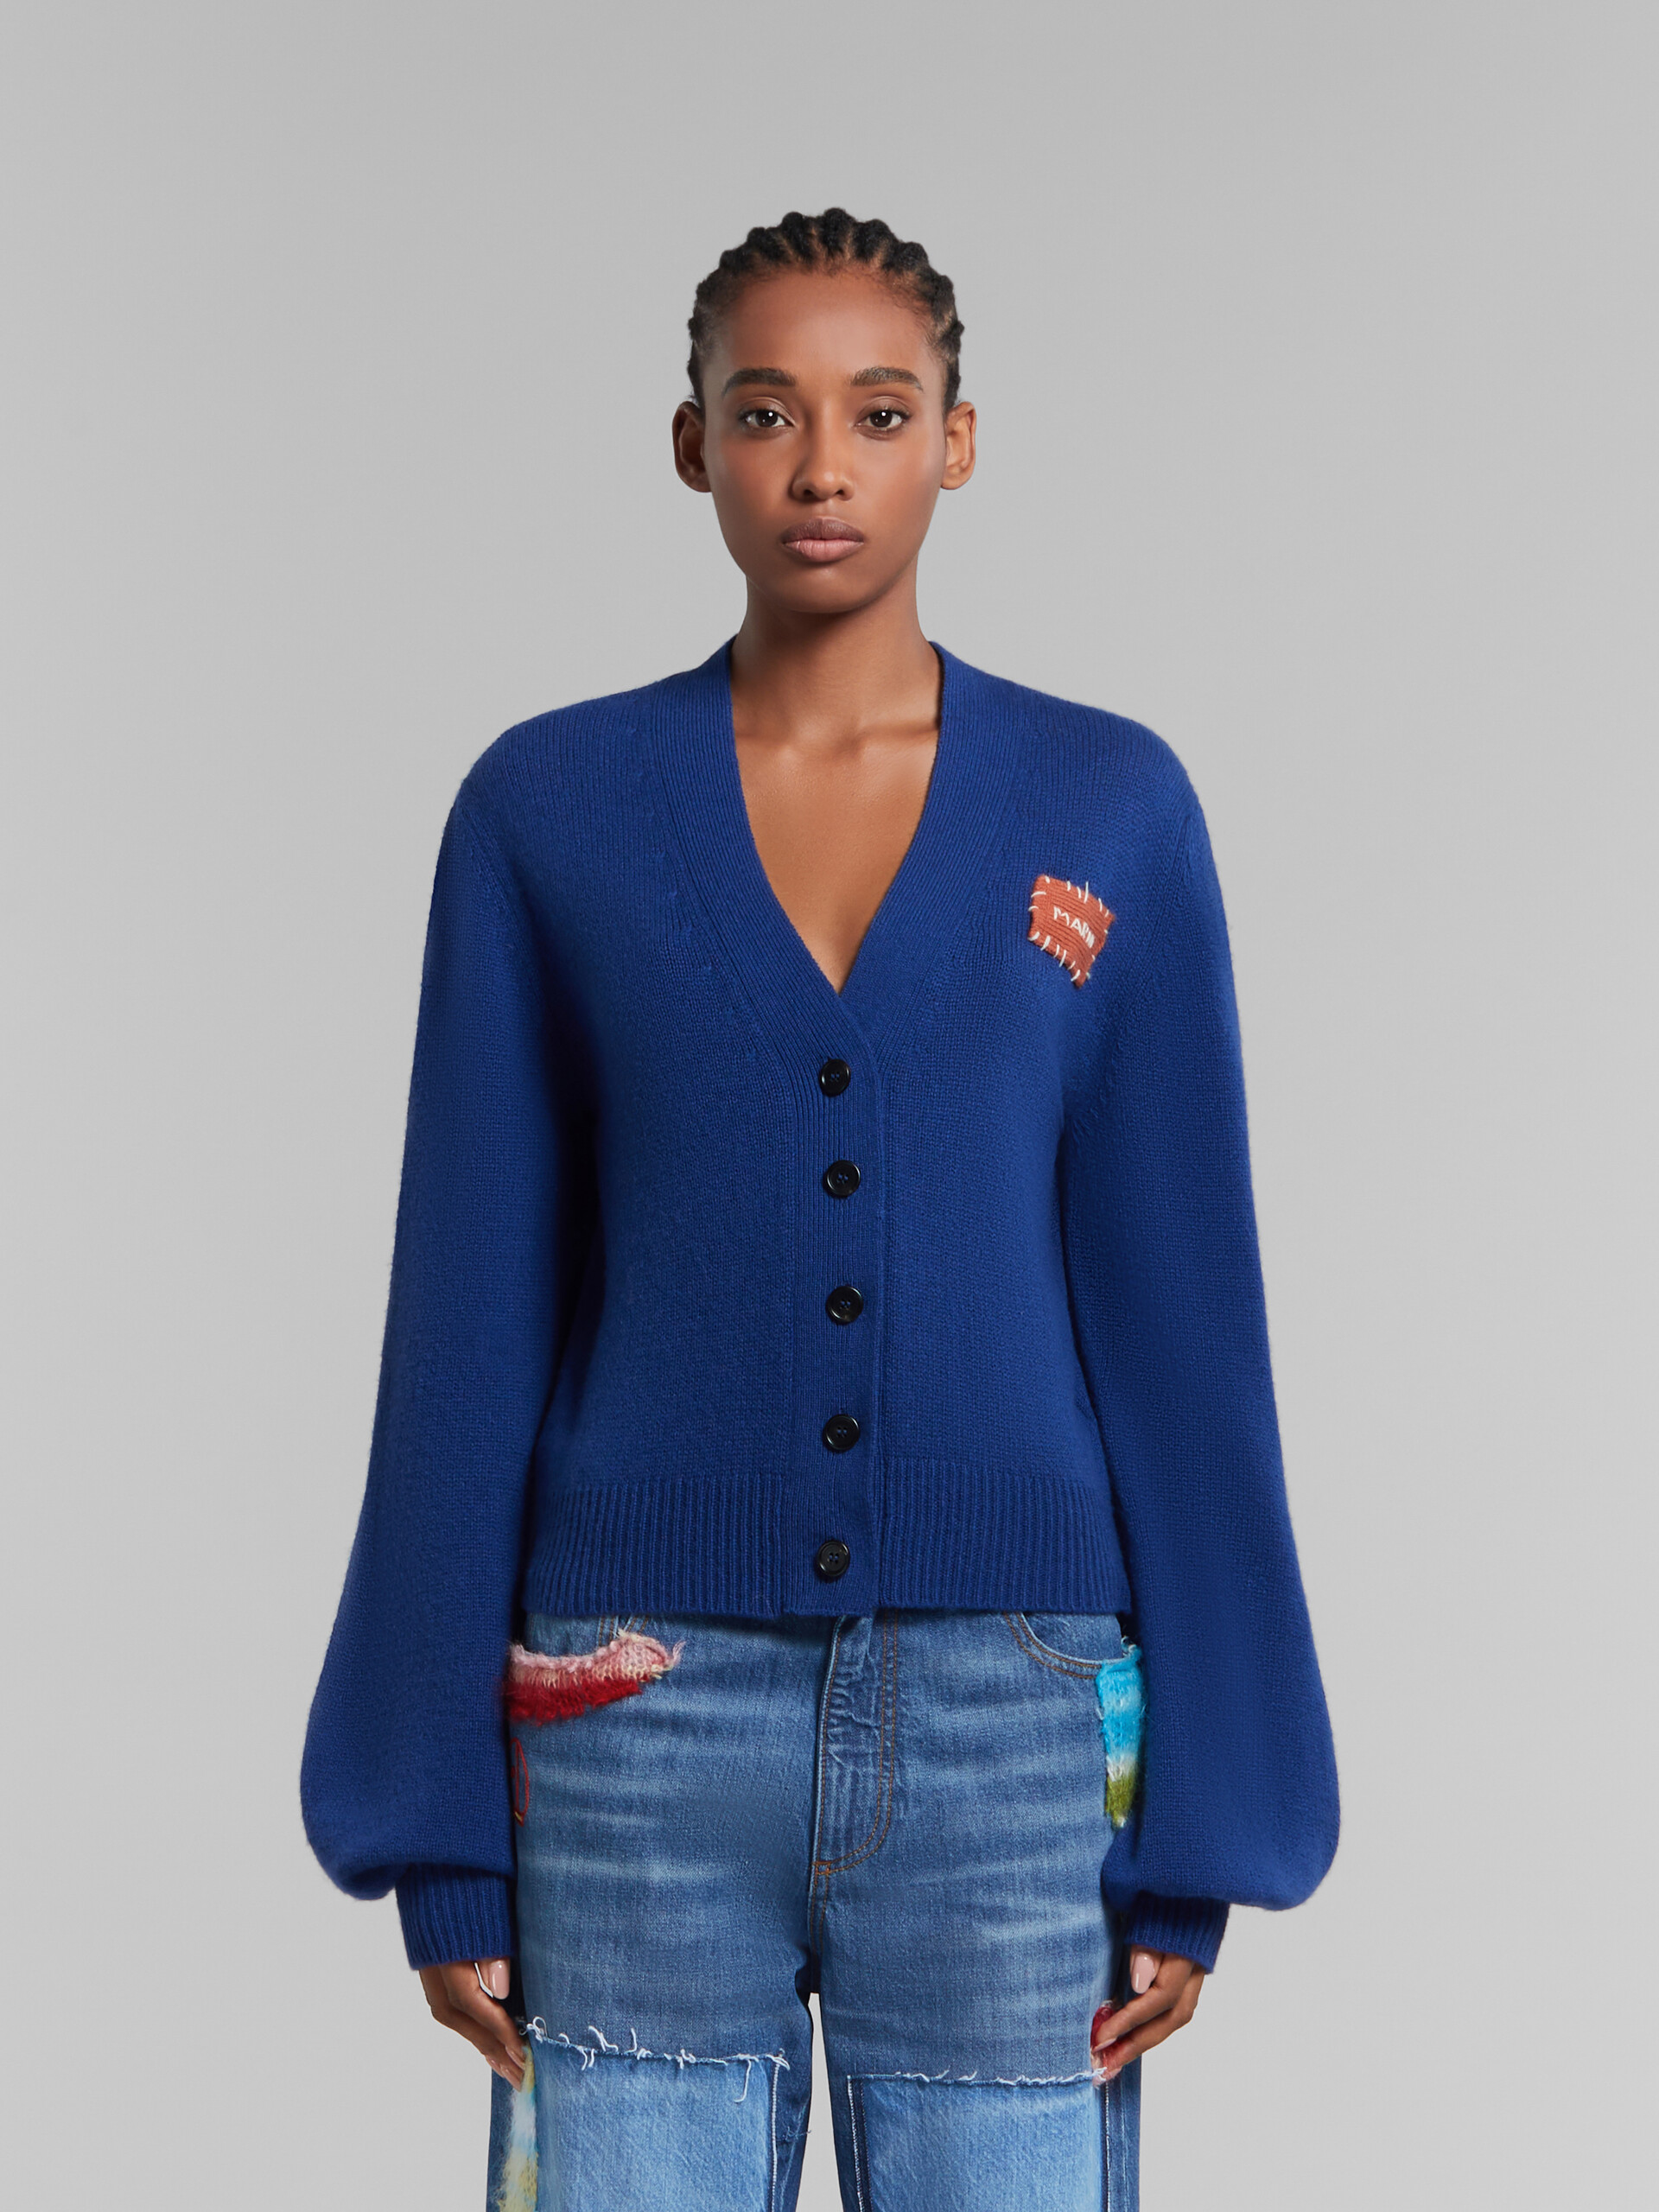 Blue cashmere cardigan with Marni mending patch - Pullovers - Image 2